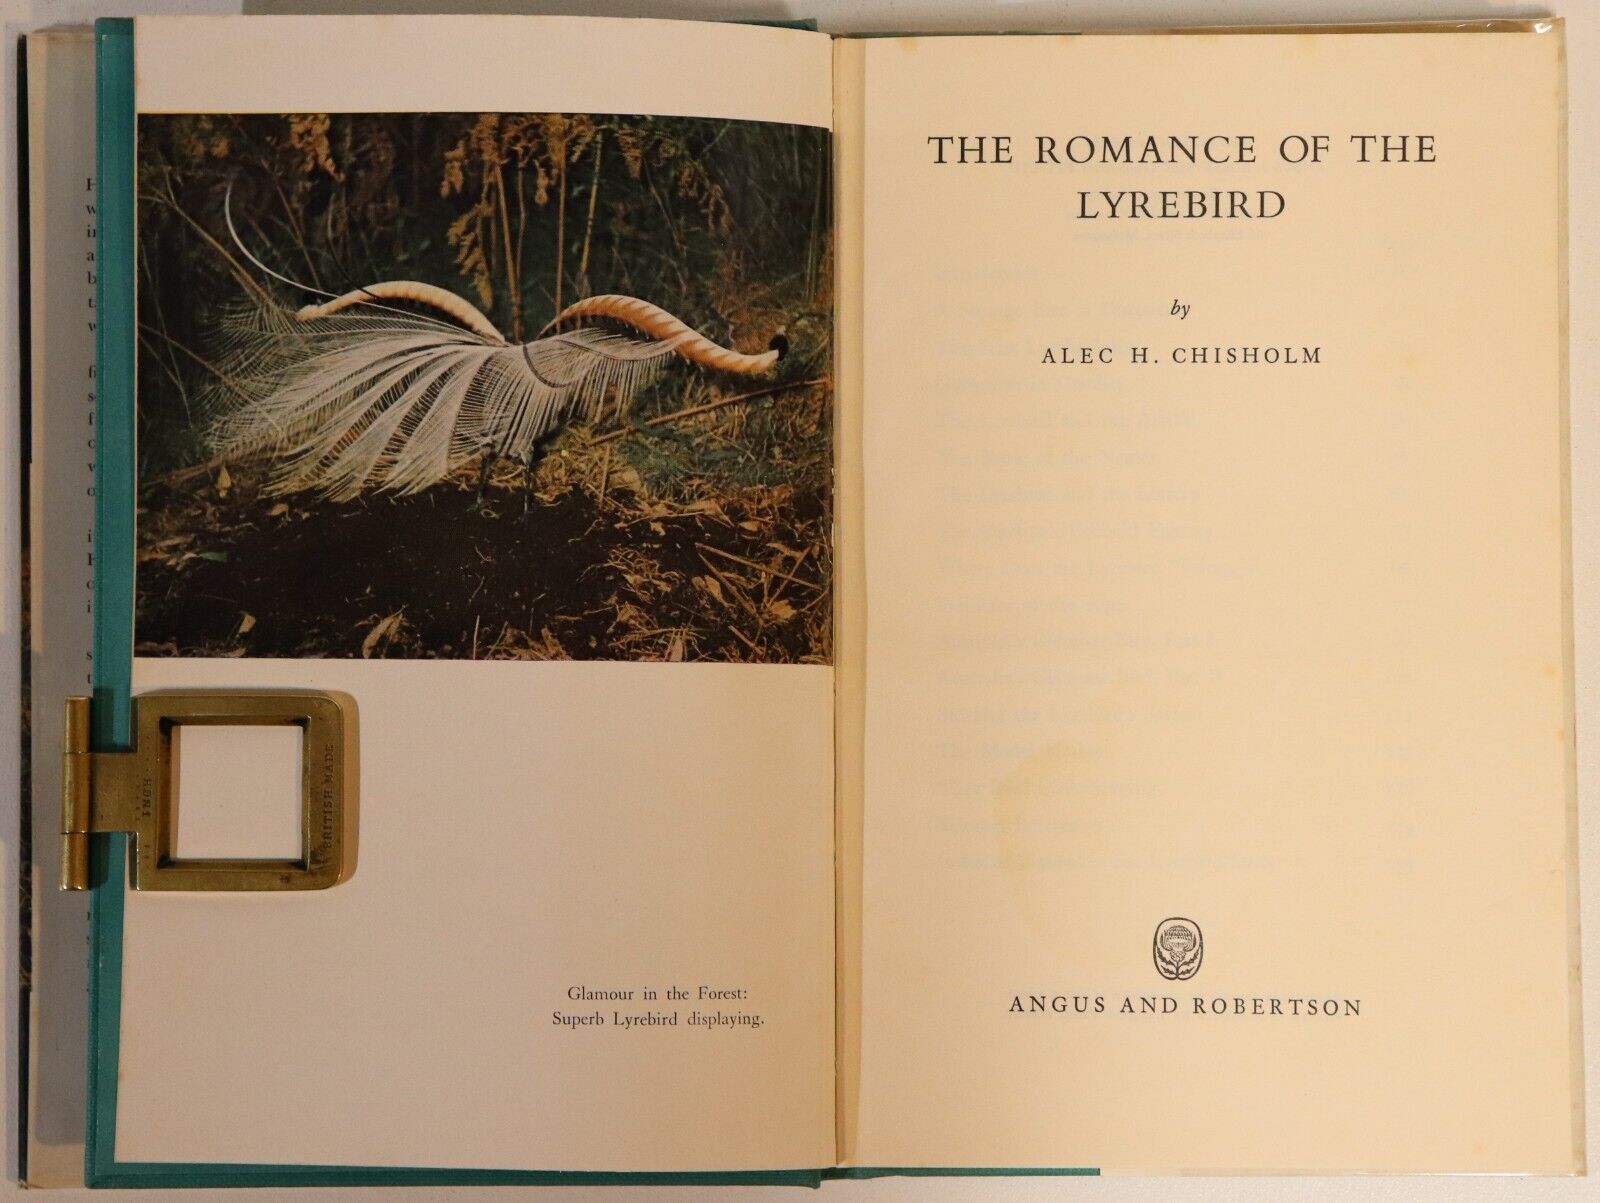 The Romance Of The Lyrebird: AC Chisholm - 1960 - 1st Ed. Natural History Book